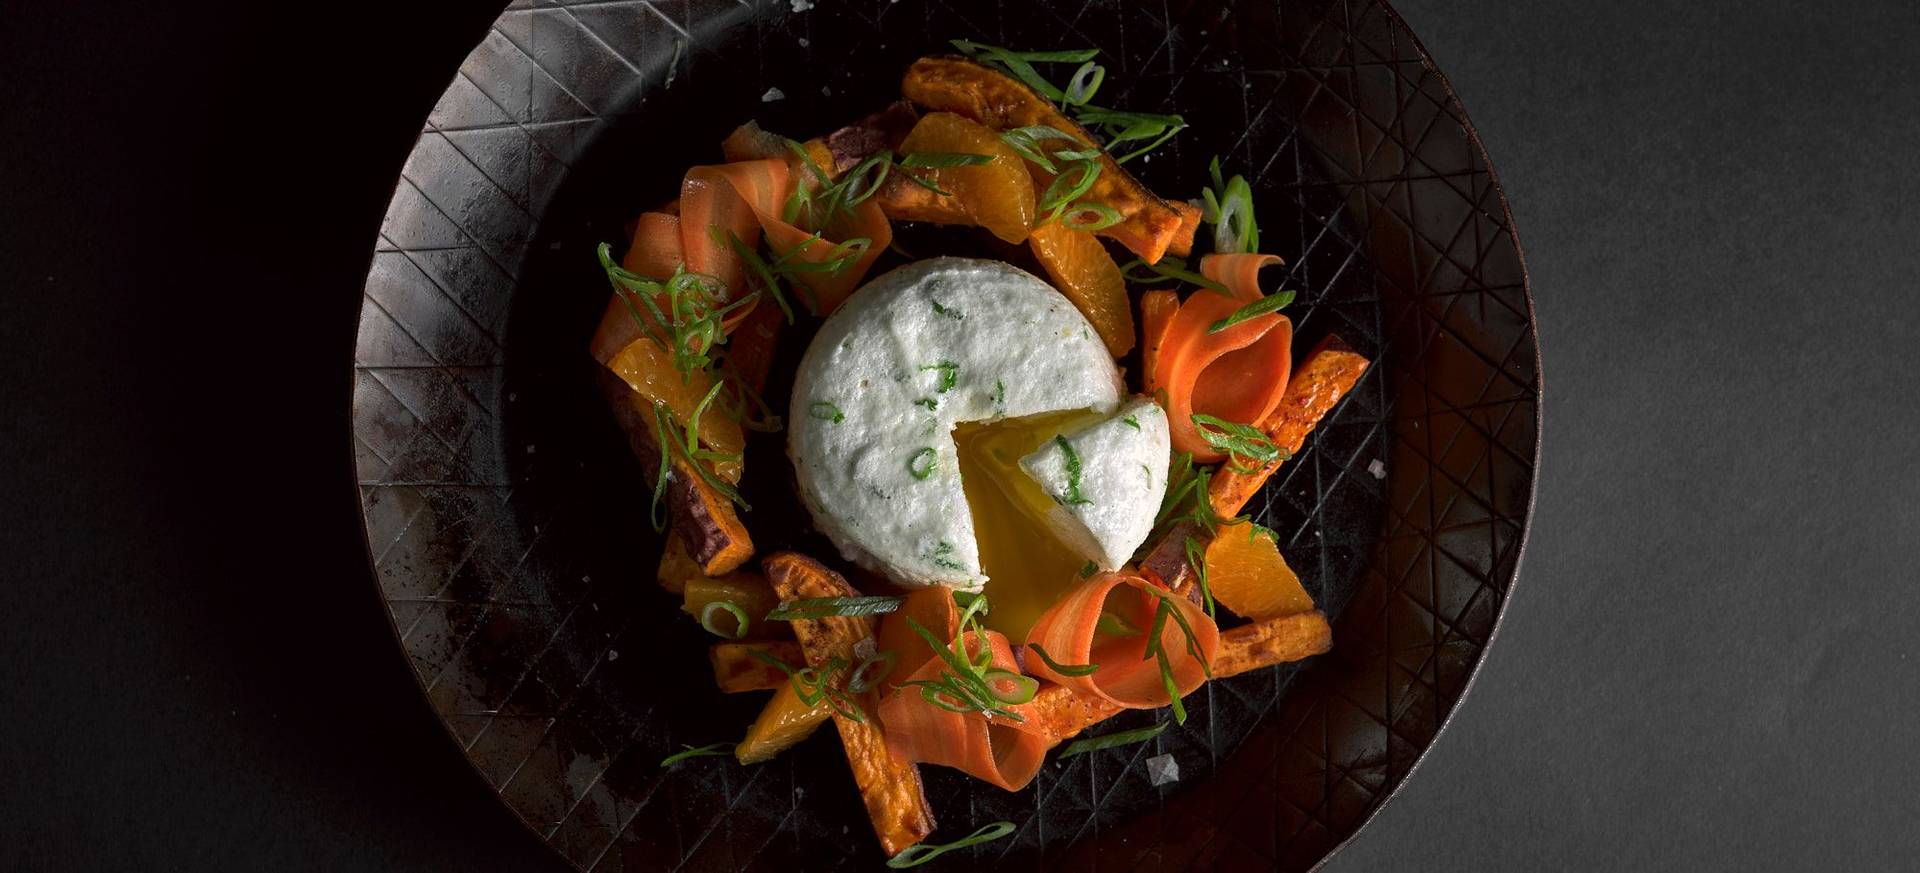 Savory Egg Soufflé with Sweet Potato & Pickled Carrots 